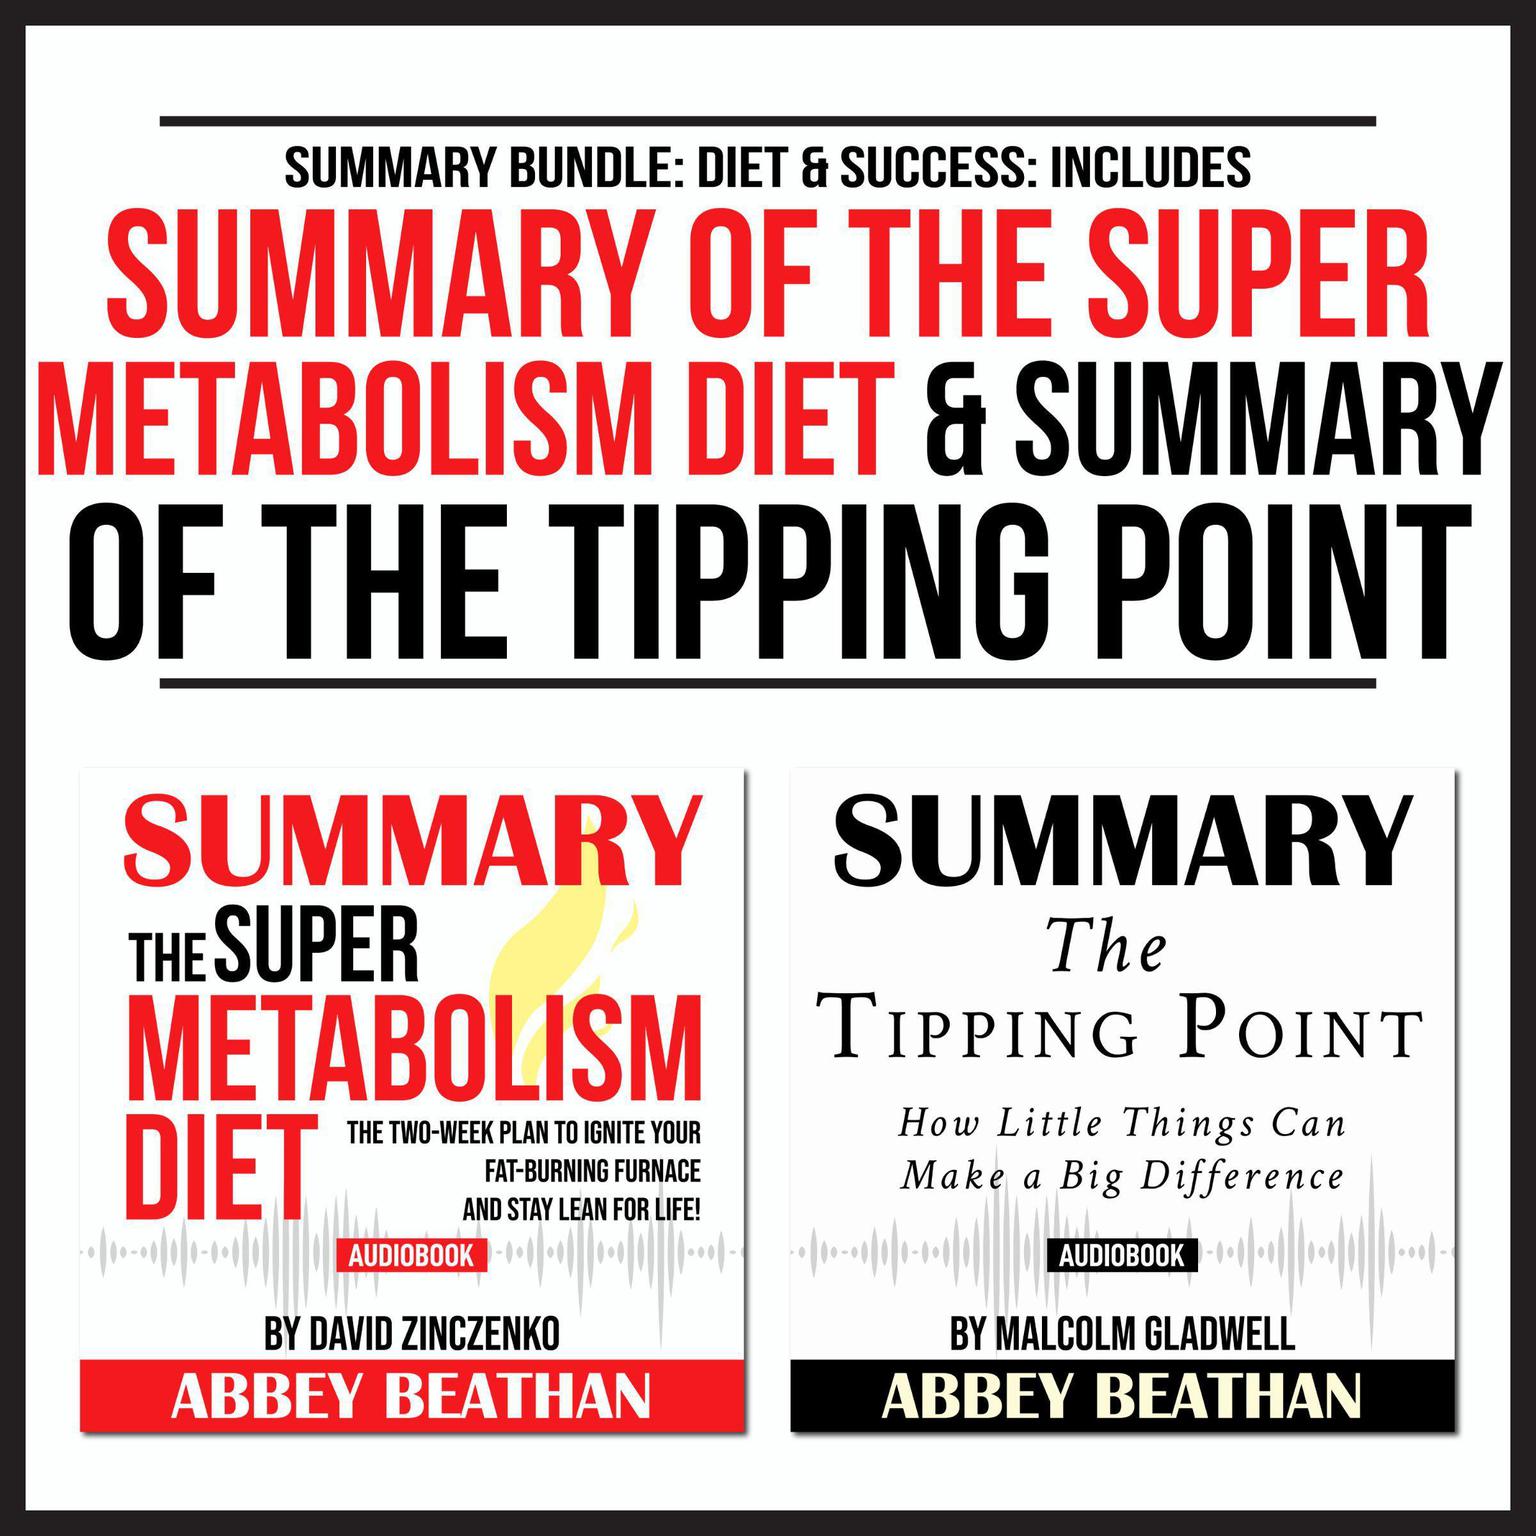 Summary Bundle: Diet & Success: Includes Summary of The Super Metabolism Diet & Summary of The Tipping Point Audiobook, by Abbey Beathan